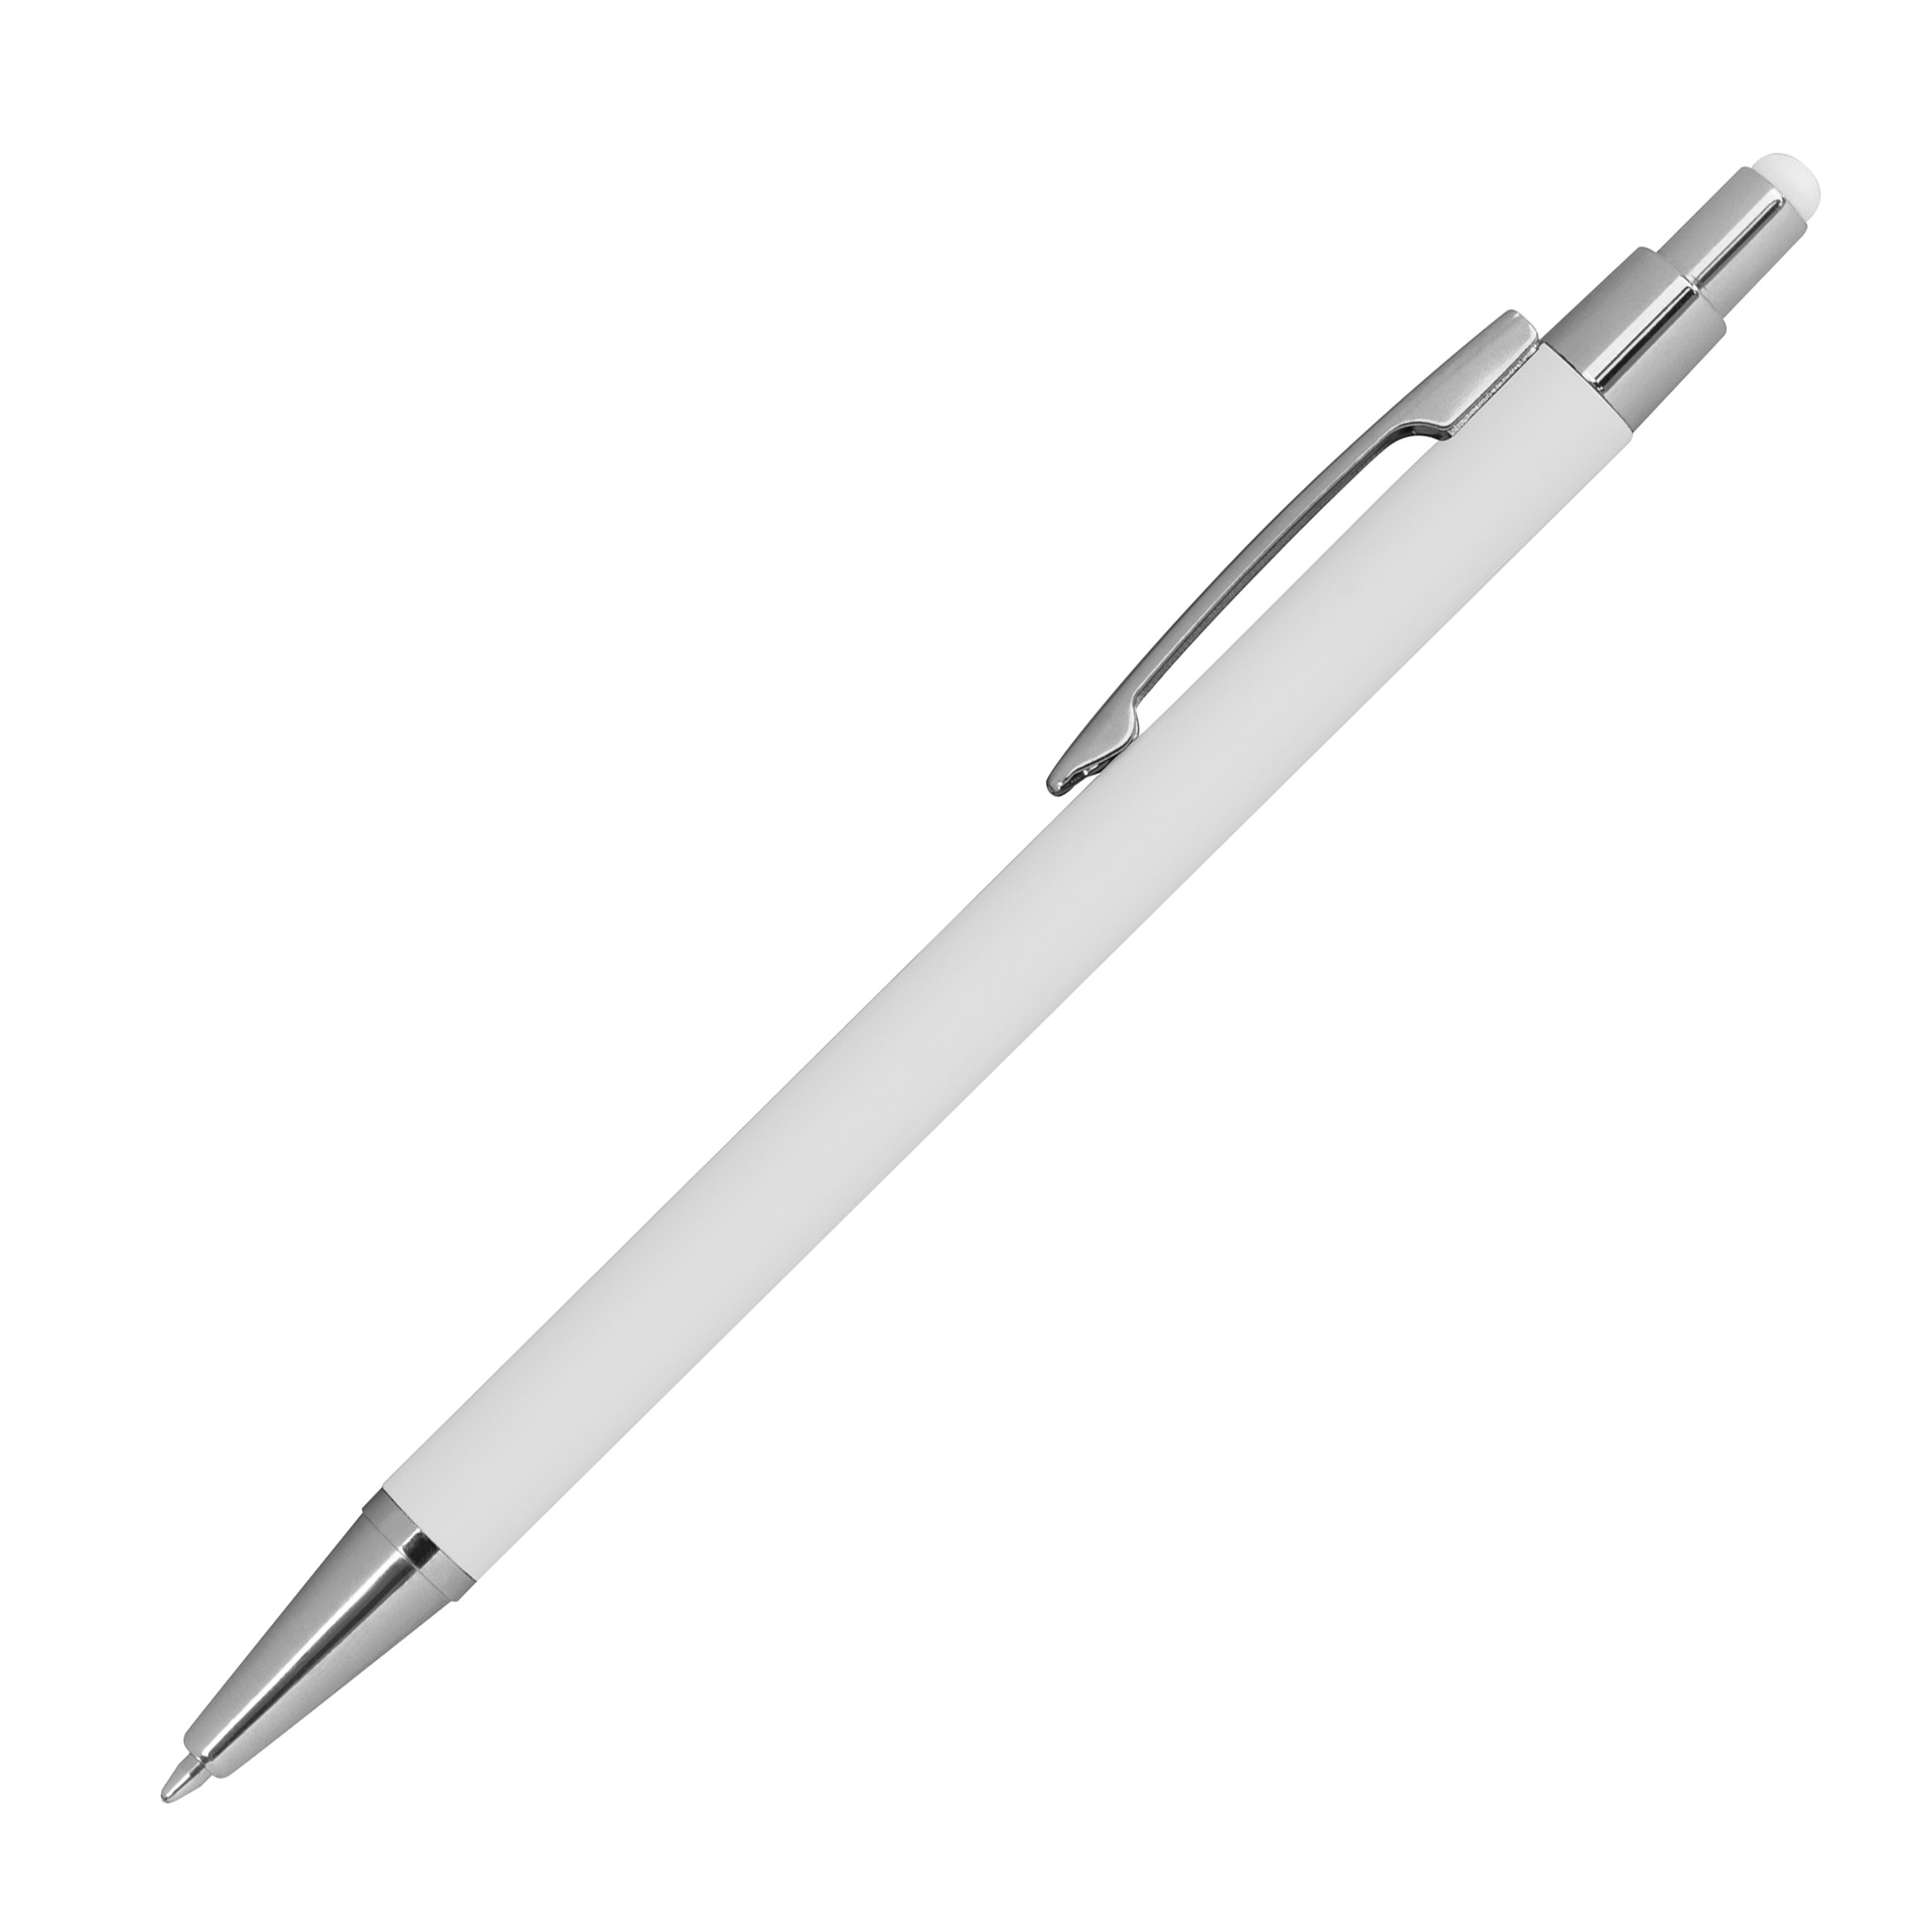 Metal ballpen with rubber coating and touch function